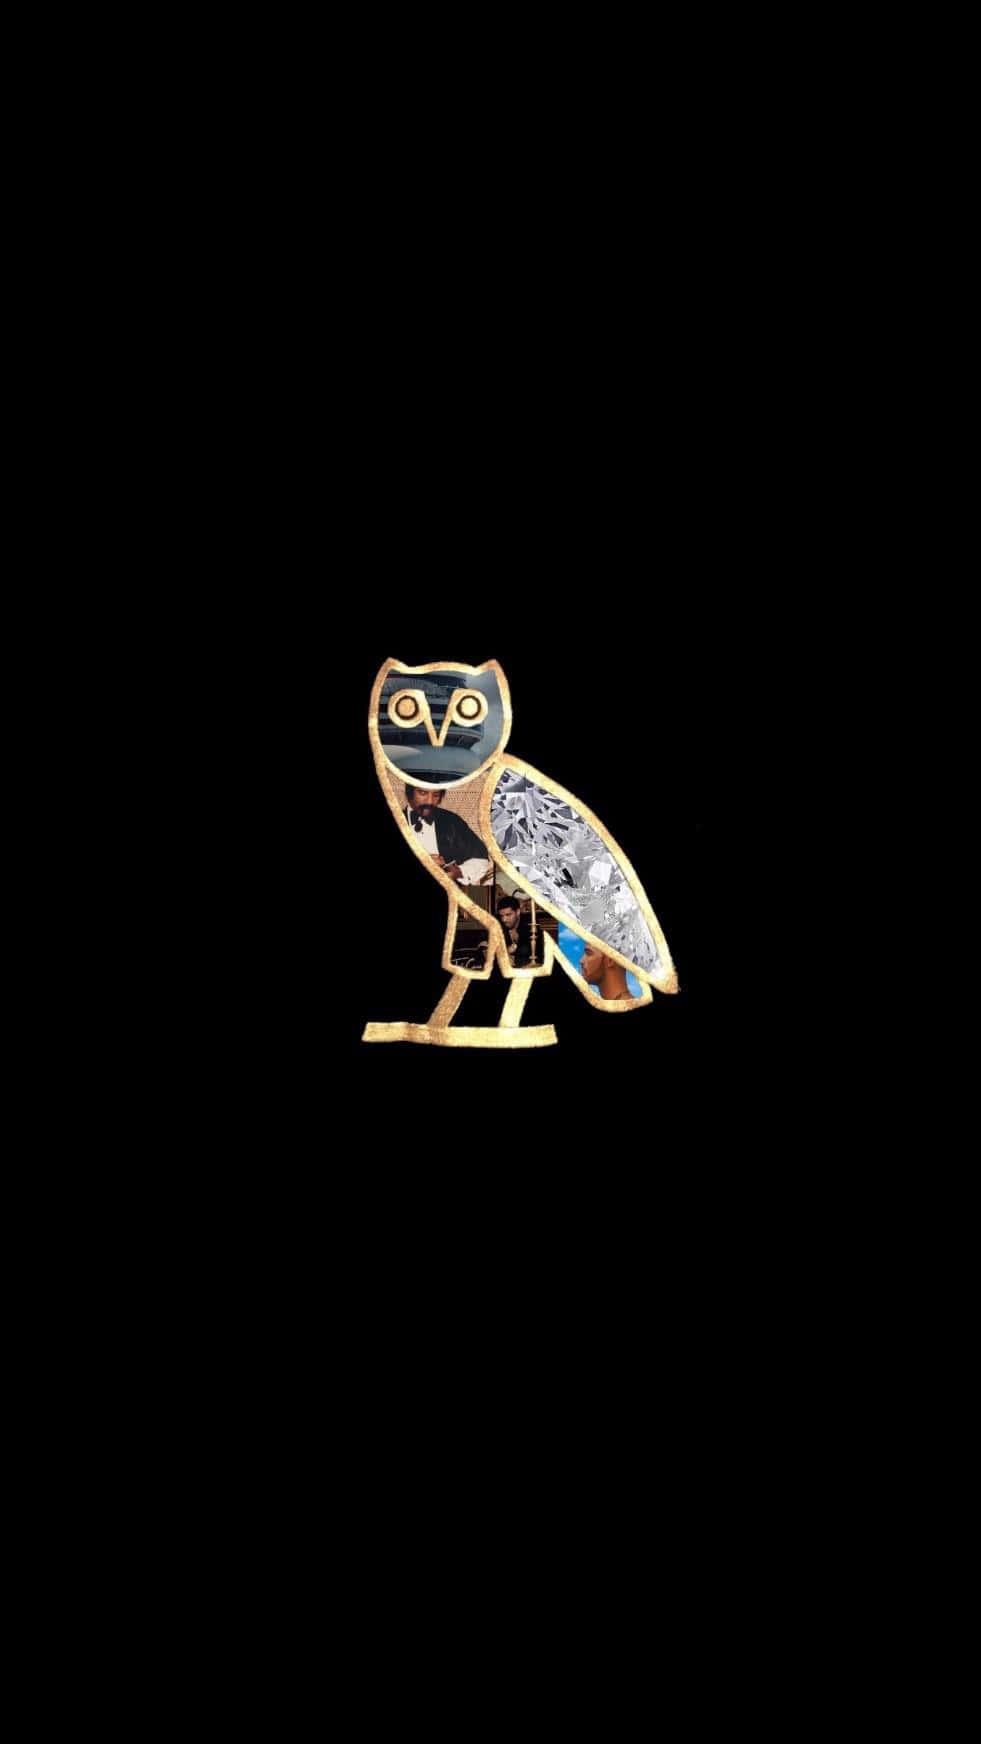 Show off your Drake fandom with this stylish OVO Owl iPhone case! Wallpaper